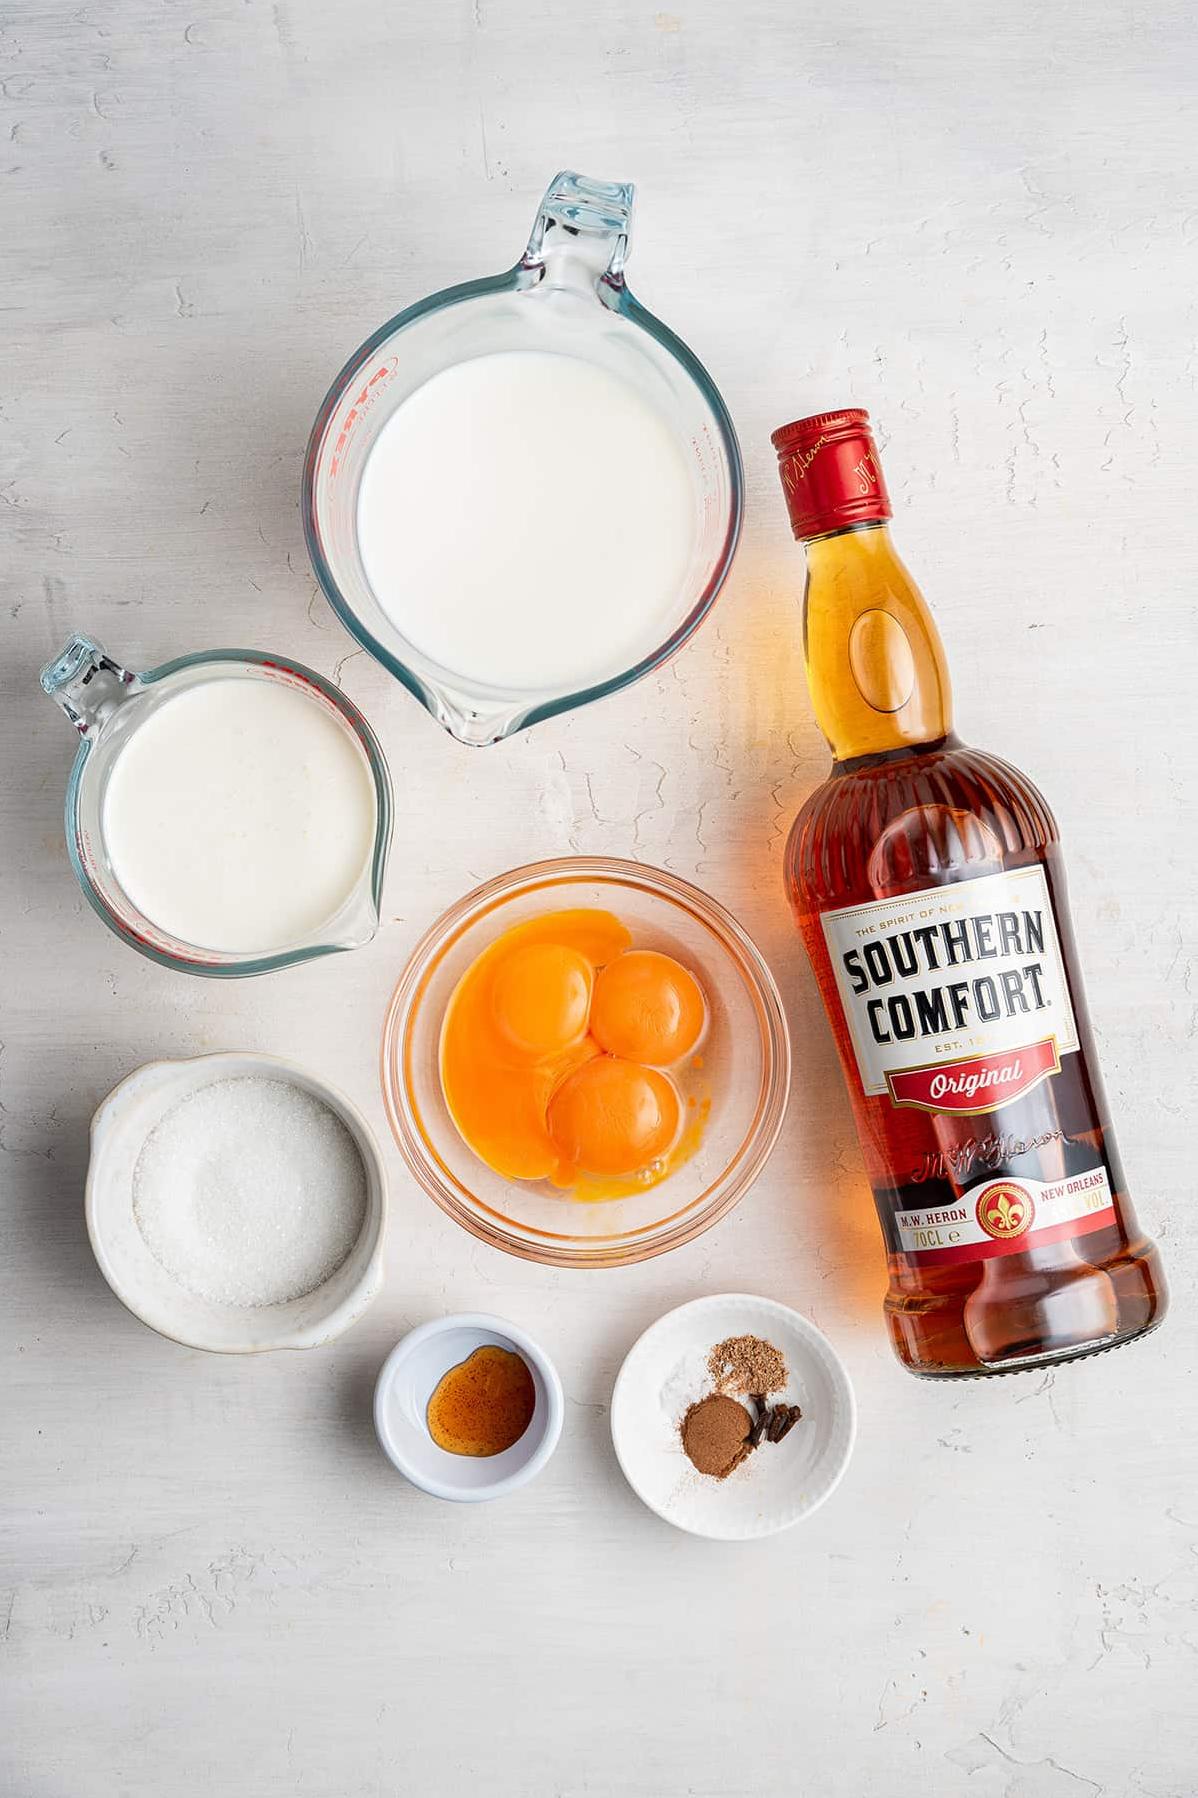  A glass of Soco eggnog, perfect for a cozy night in.